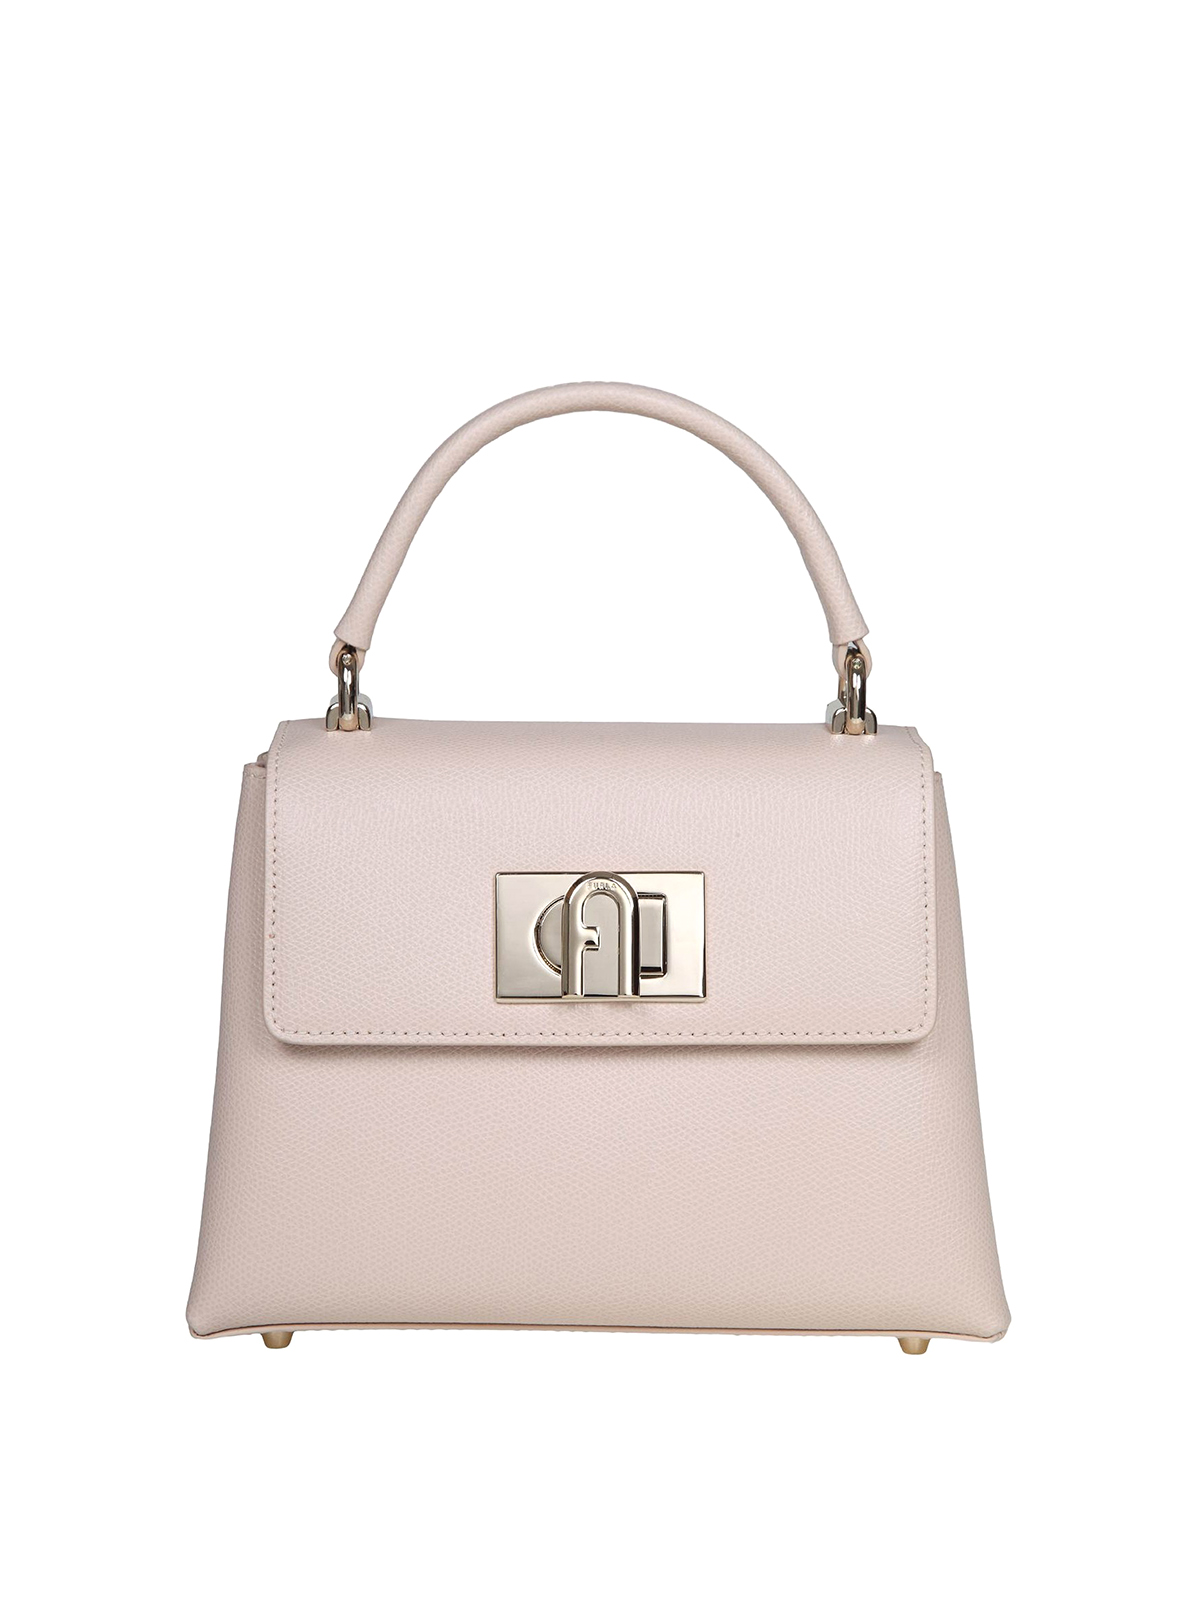 Furla 1927 Leather Bag With Jewel Closure In Light Pink